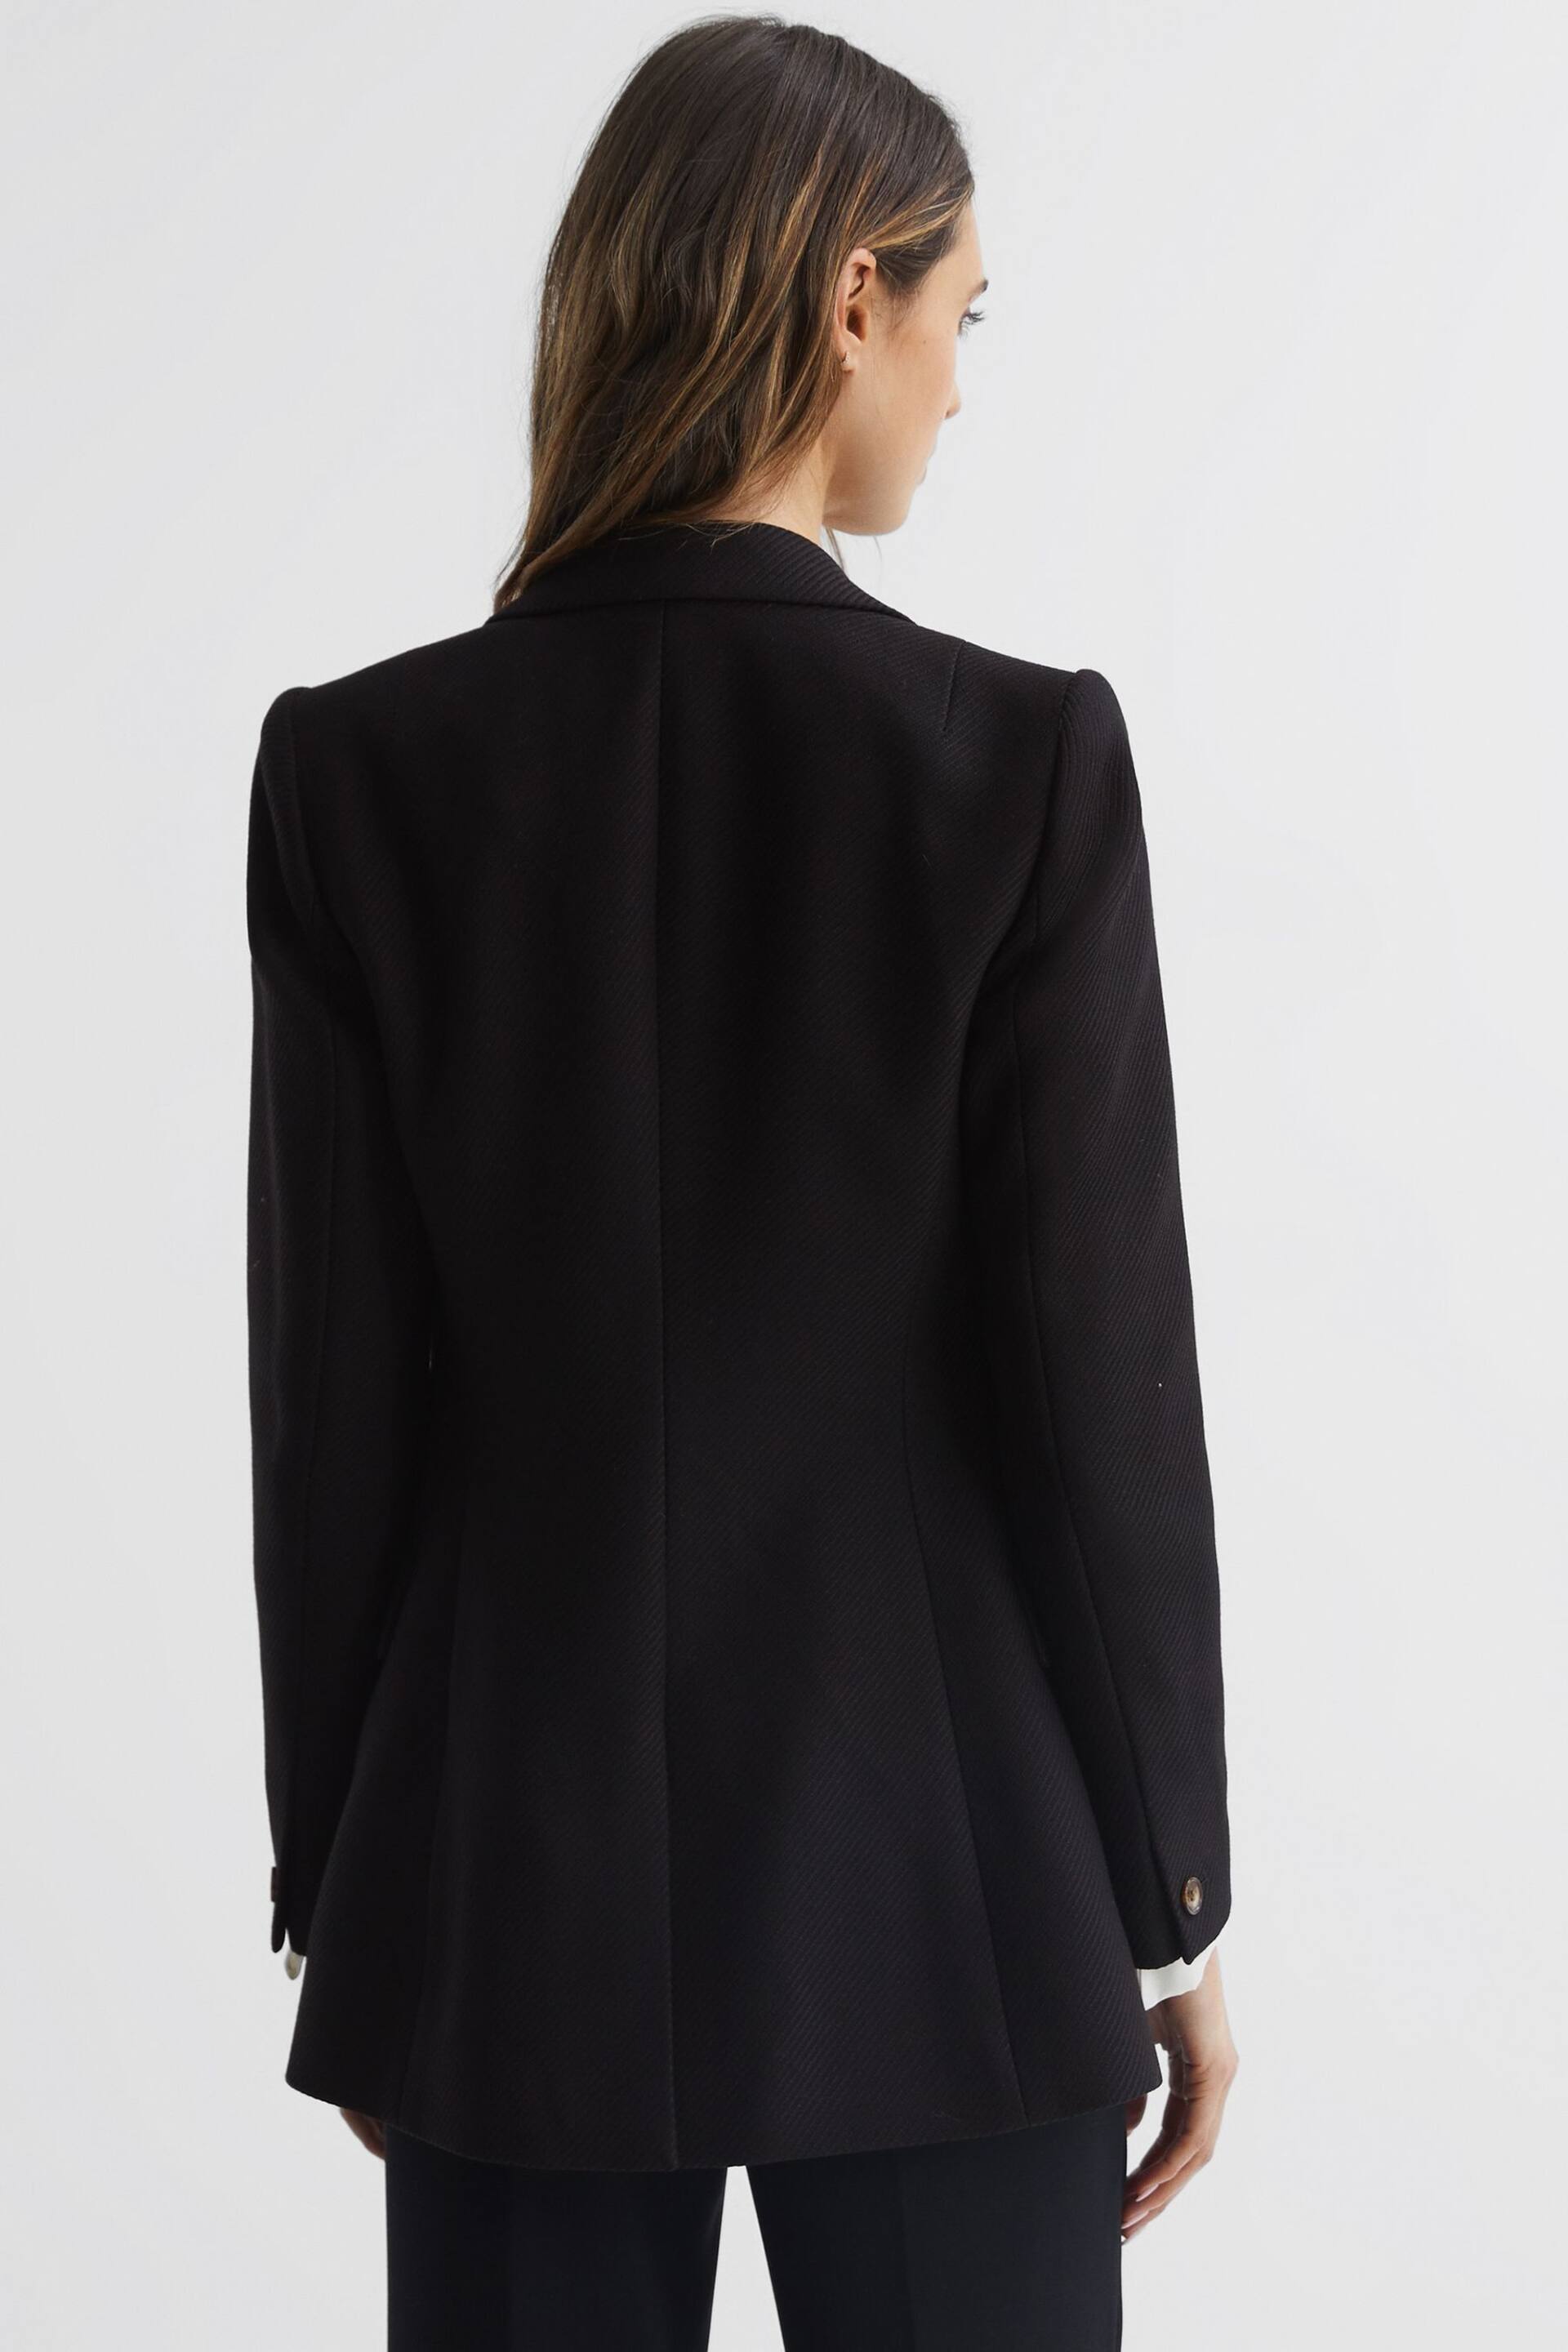 Reiss Black Laura Double Breasted Twill Blazer - Image 5 of 11